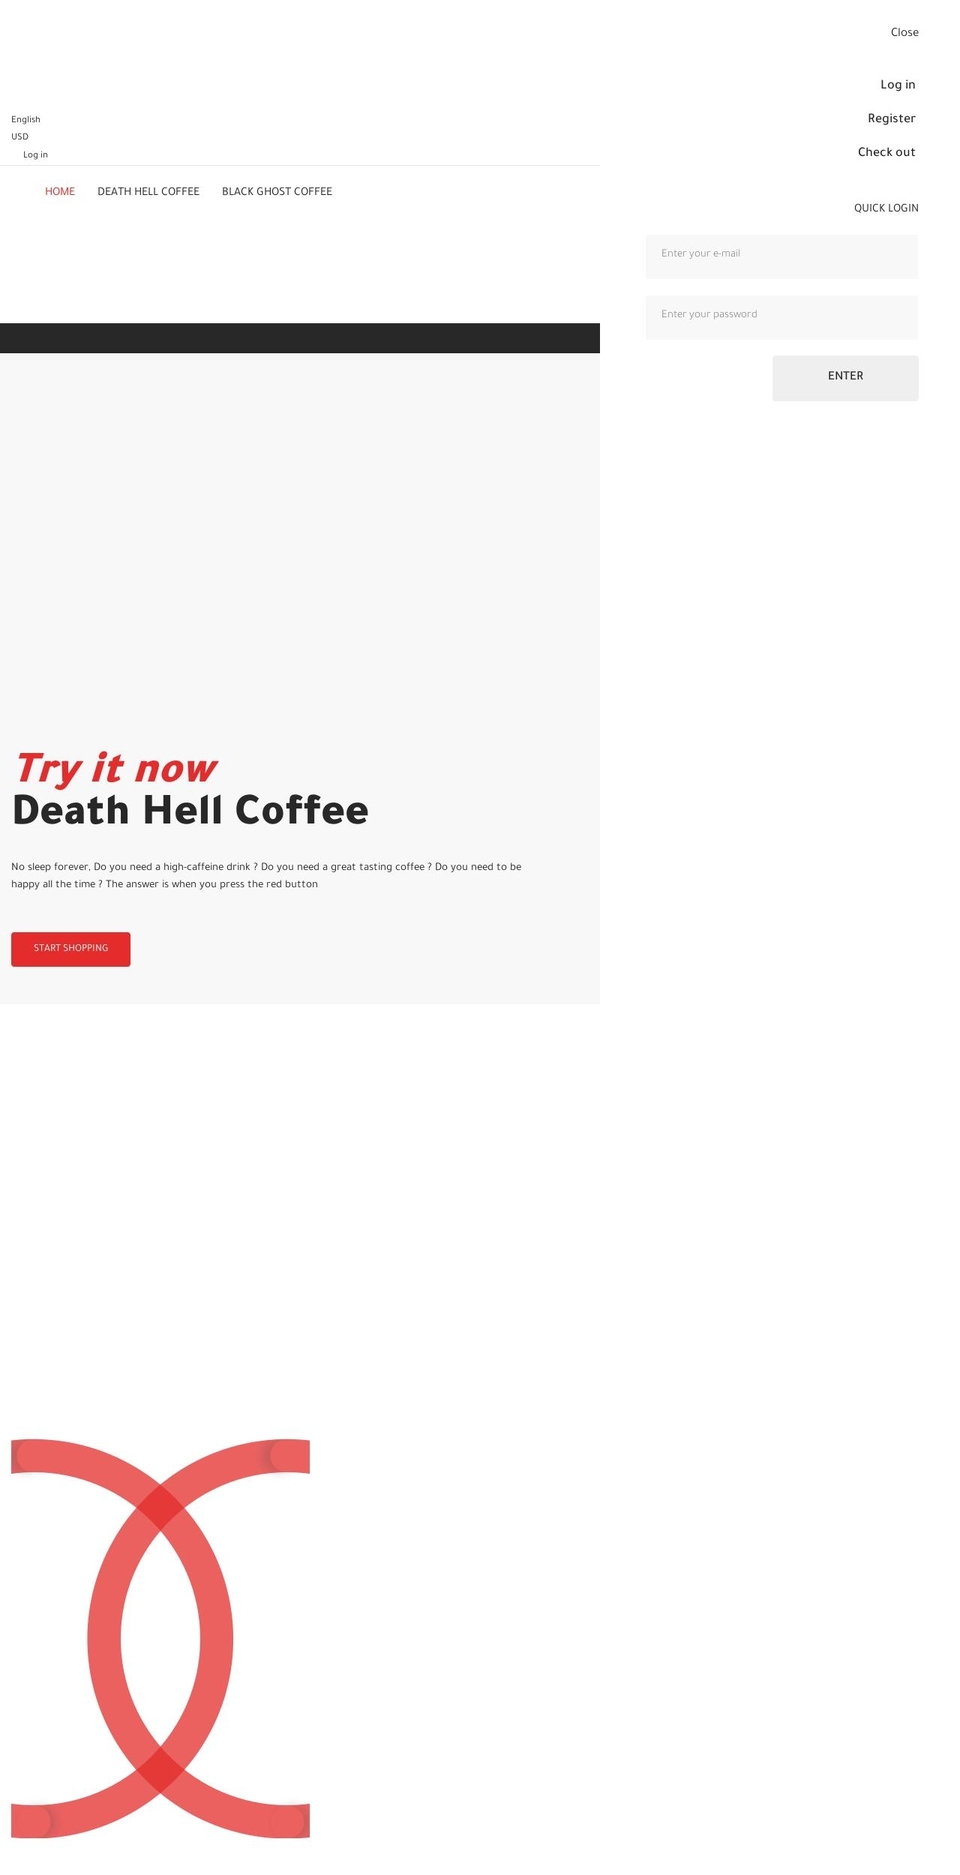 foxic Shopify theme site example deathhellcoffee.com